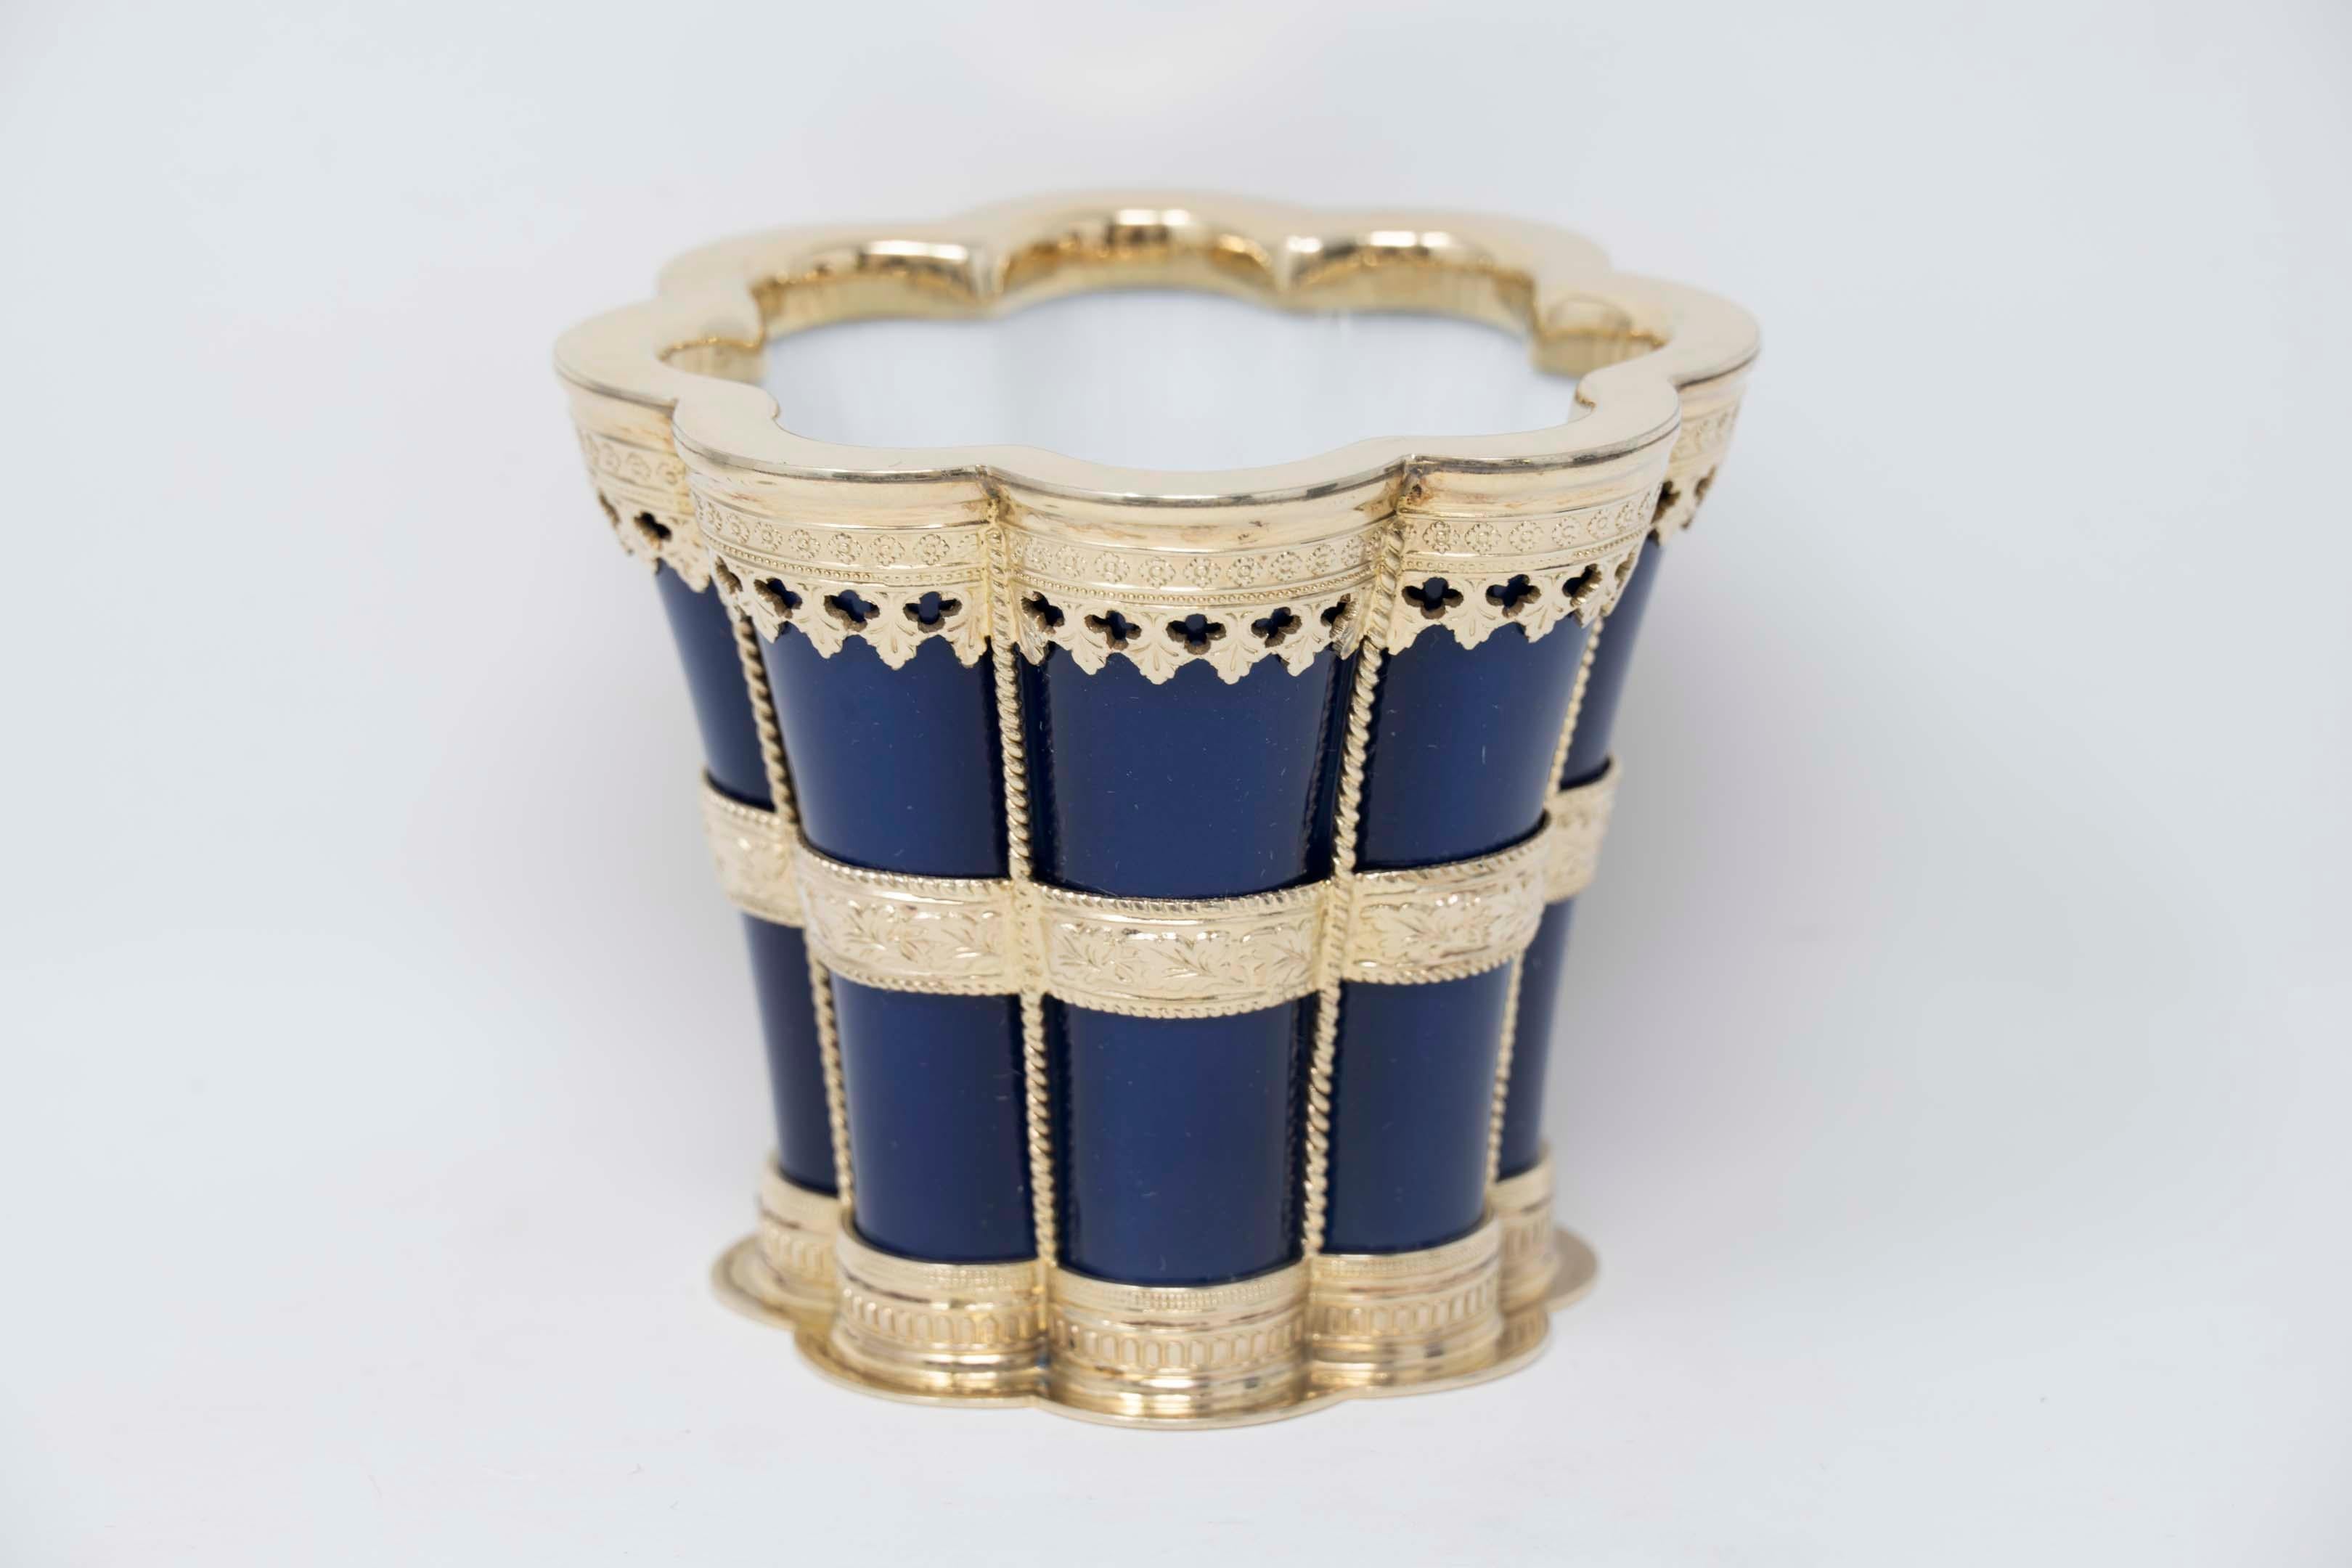 Royal Copenhagen Margrethe cup with blue porcelain and sterling silver gilded mounting crafted by Anton Michelsen silversmith in Copenhagen 1893-2001.  Royal Copenhagen stamp #3264 and silversmith mark, circa 1950-60. Cup measures 7cm x 8.5 cm in